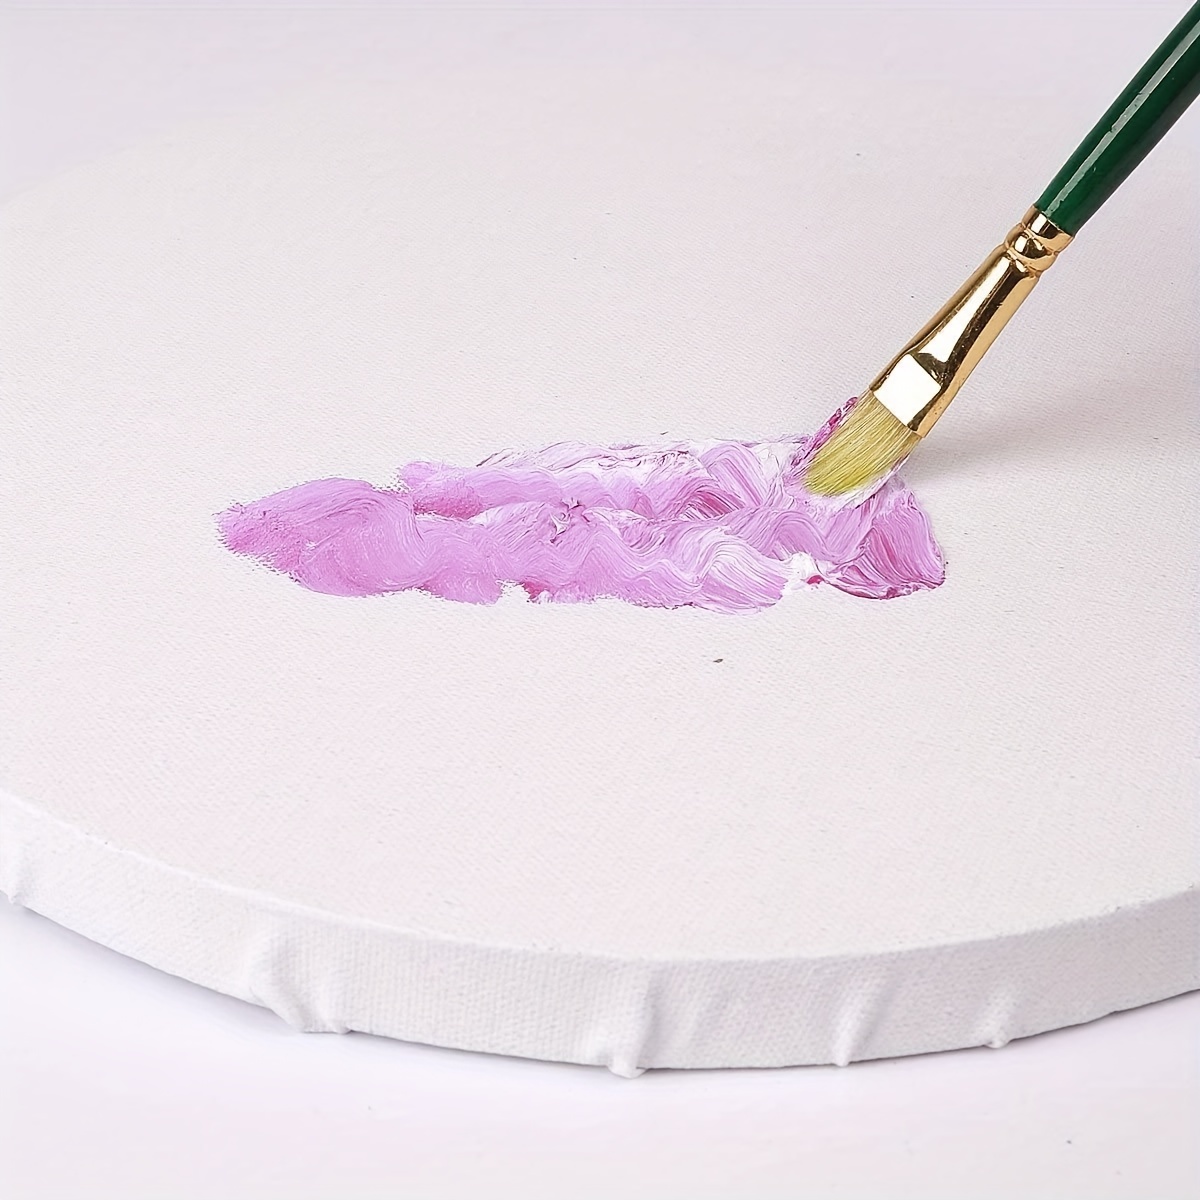 Round Canvas Board White Painting Board for Crafts